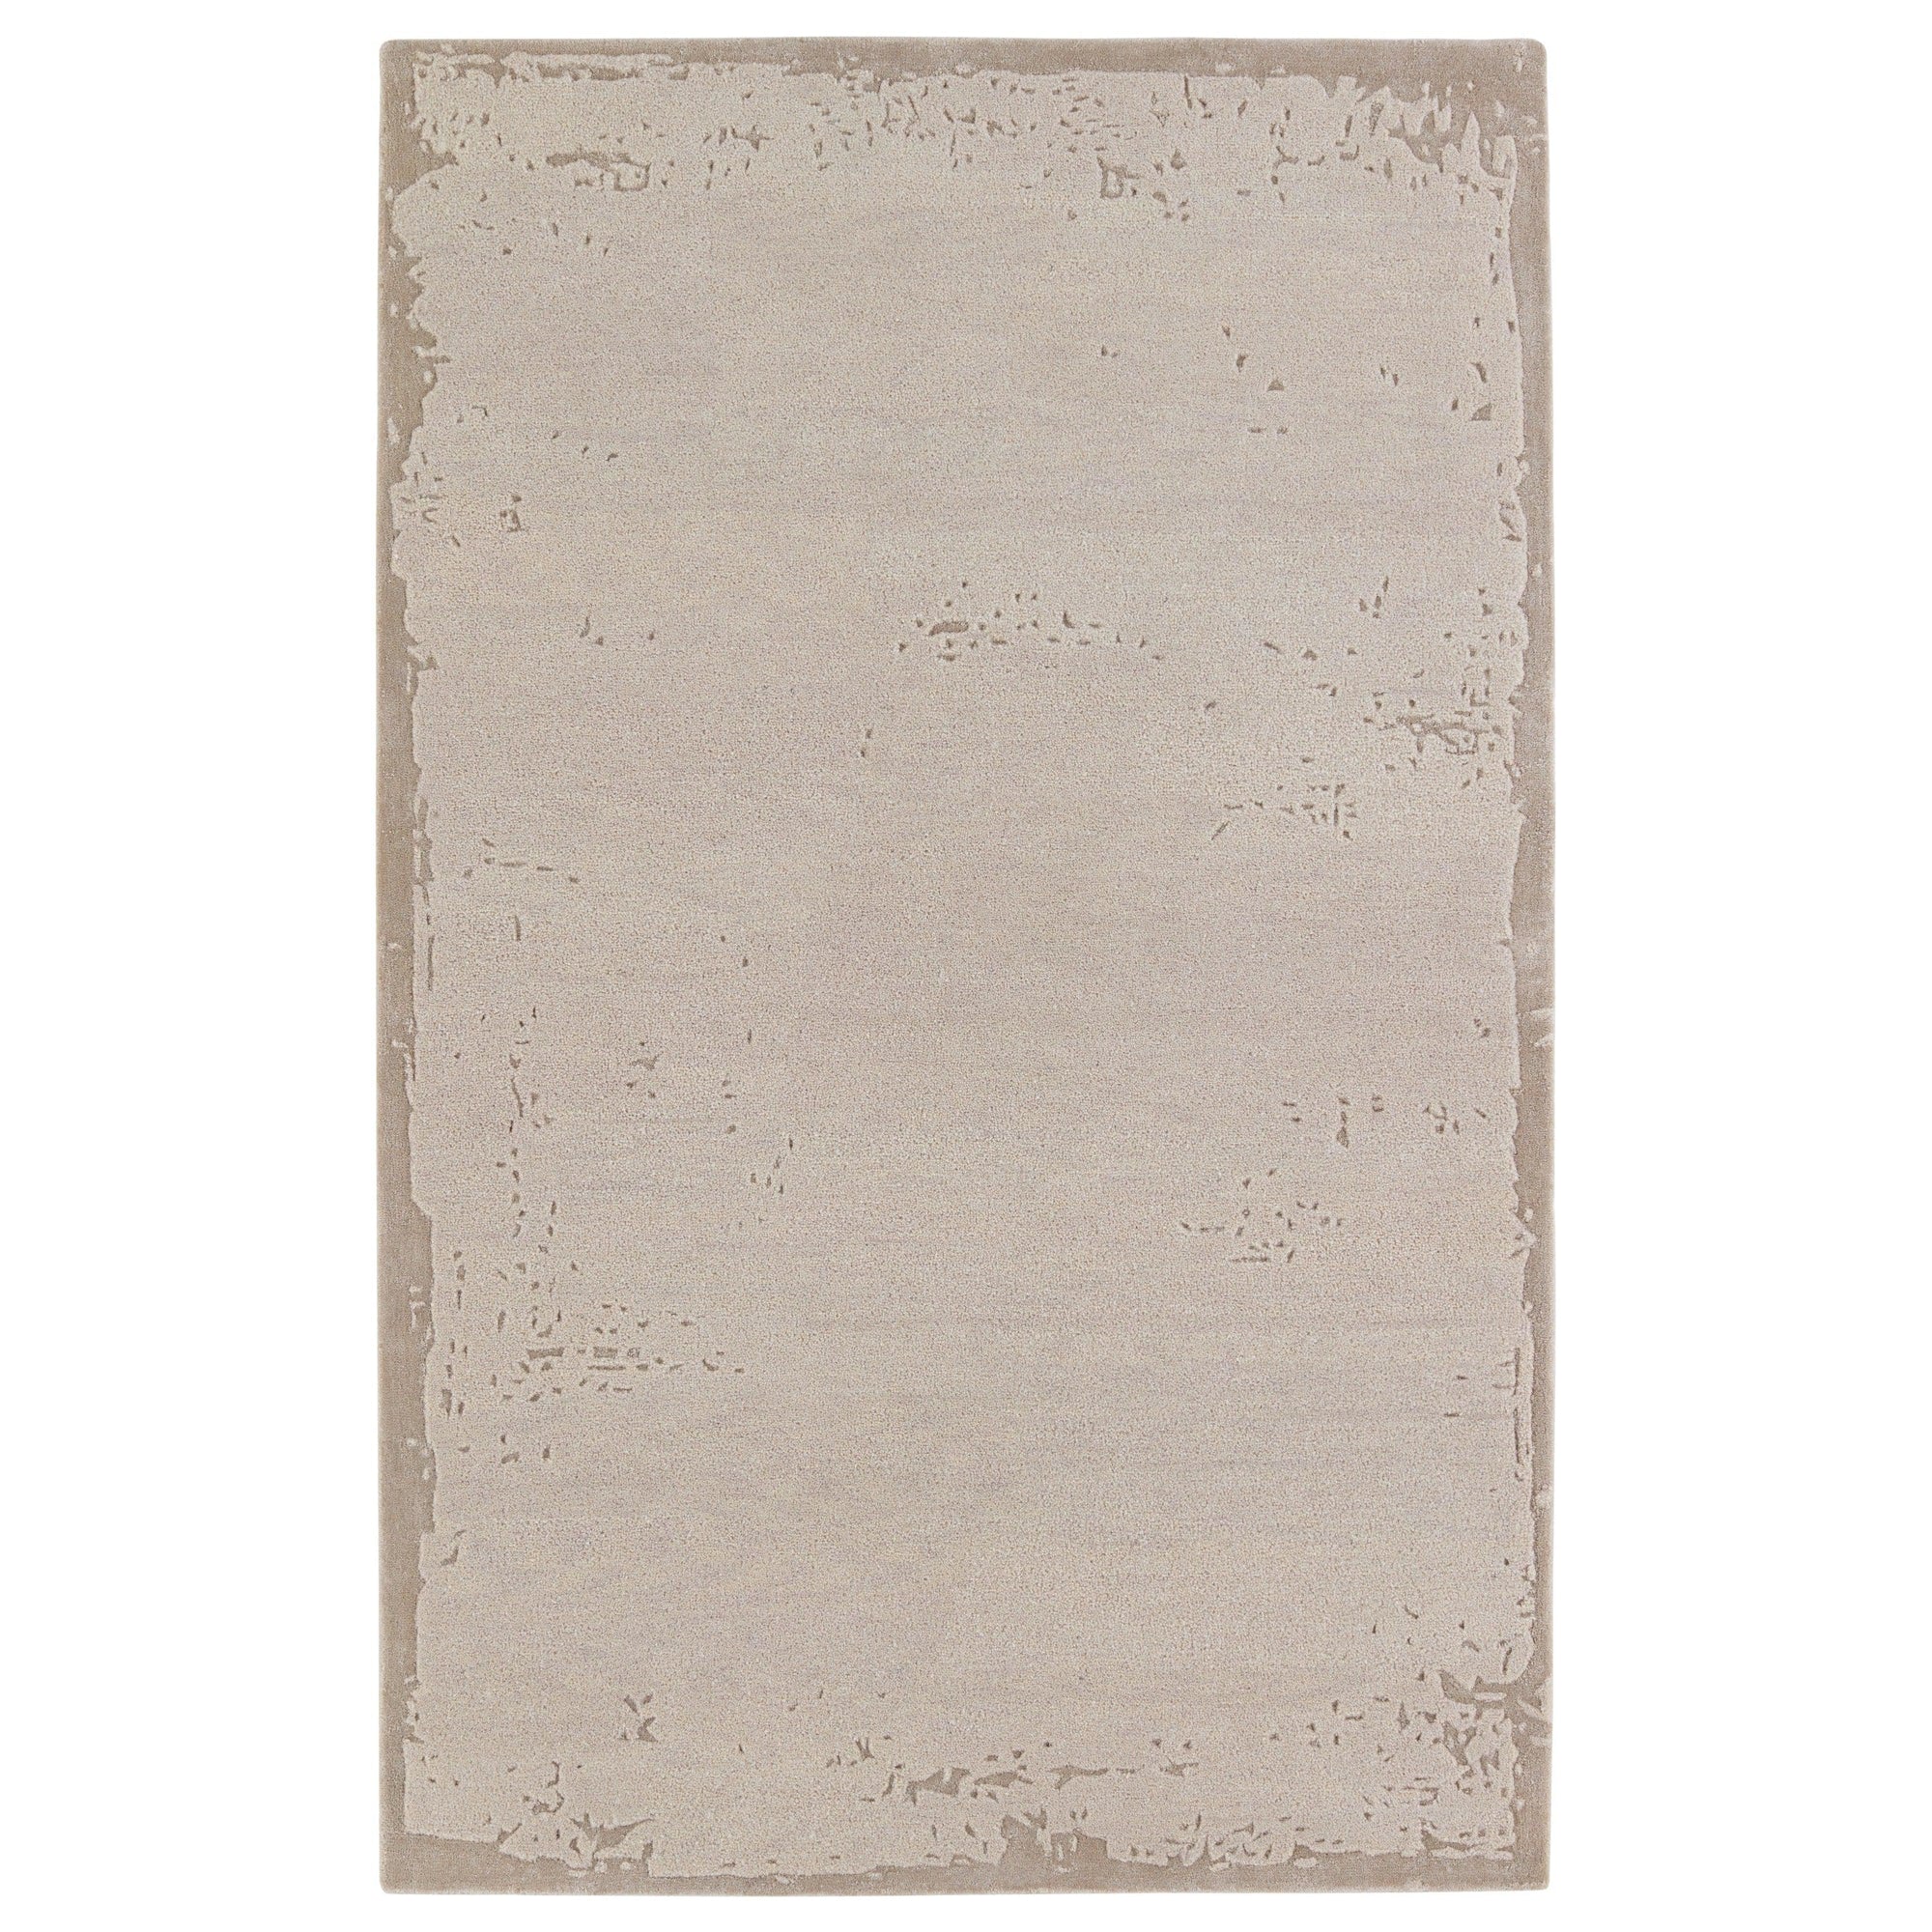 Rugs by Roo | Jaipur Living Avenue Handmade Abstract Cream Taupe Area Rug-RUG153414